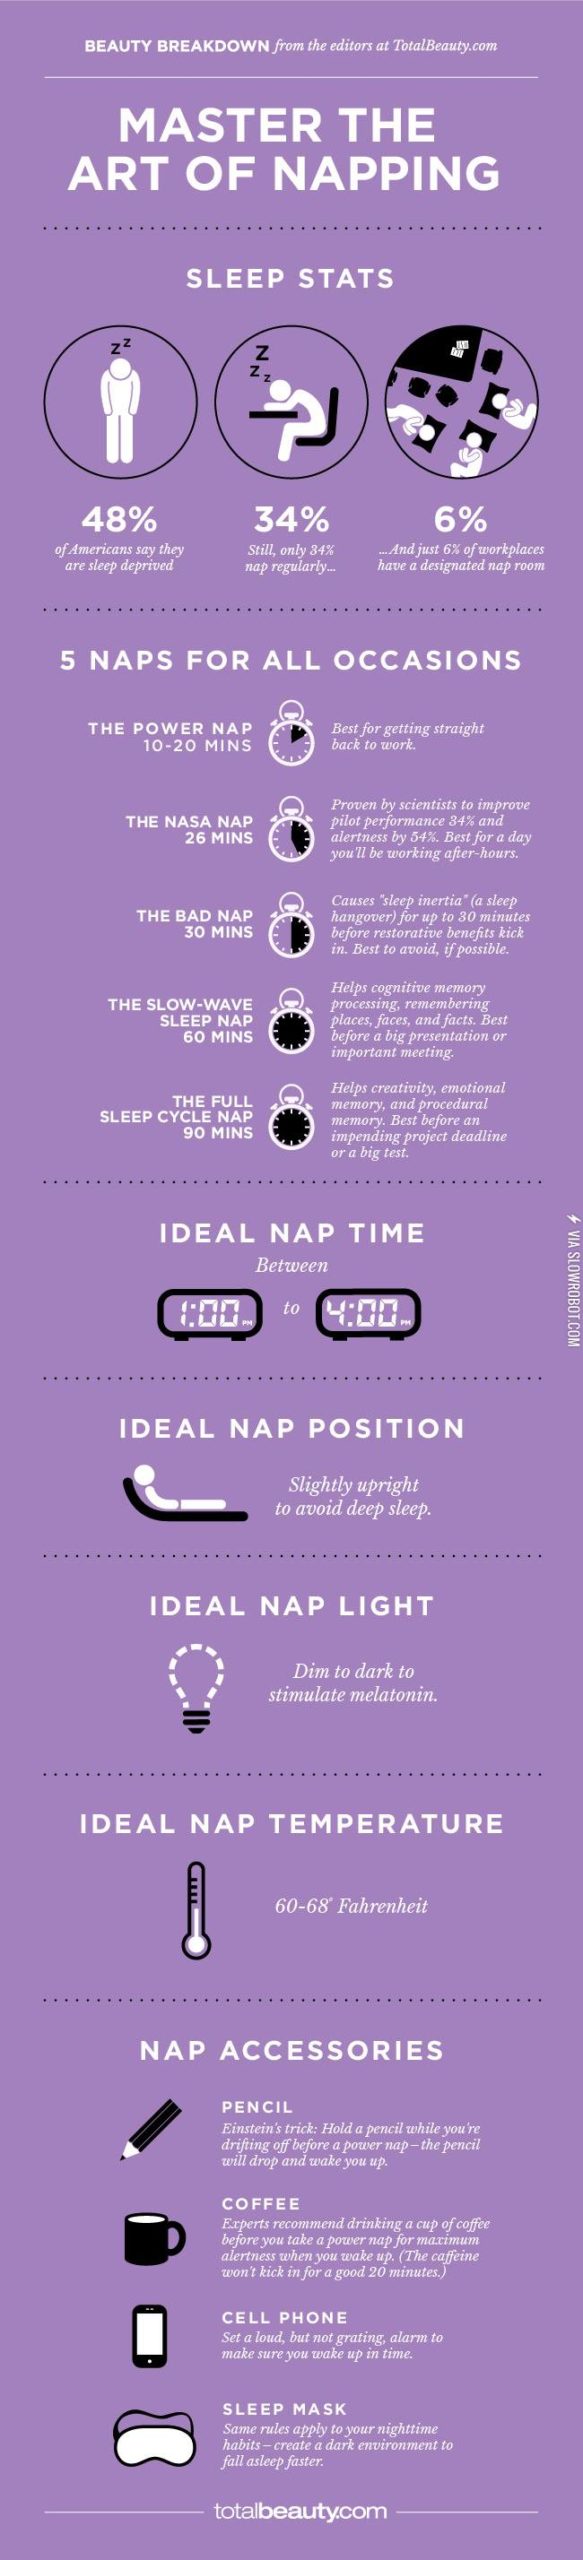 The+art+of+napping